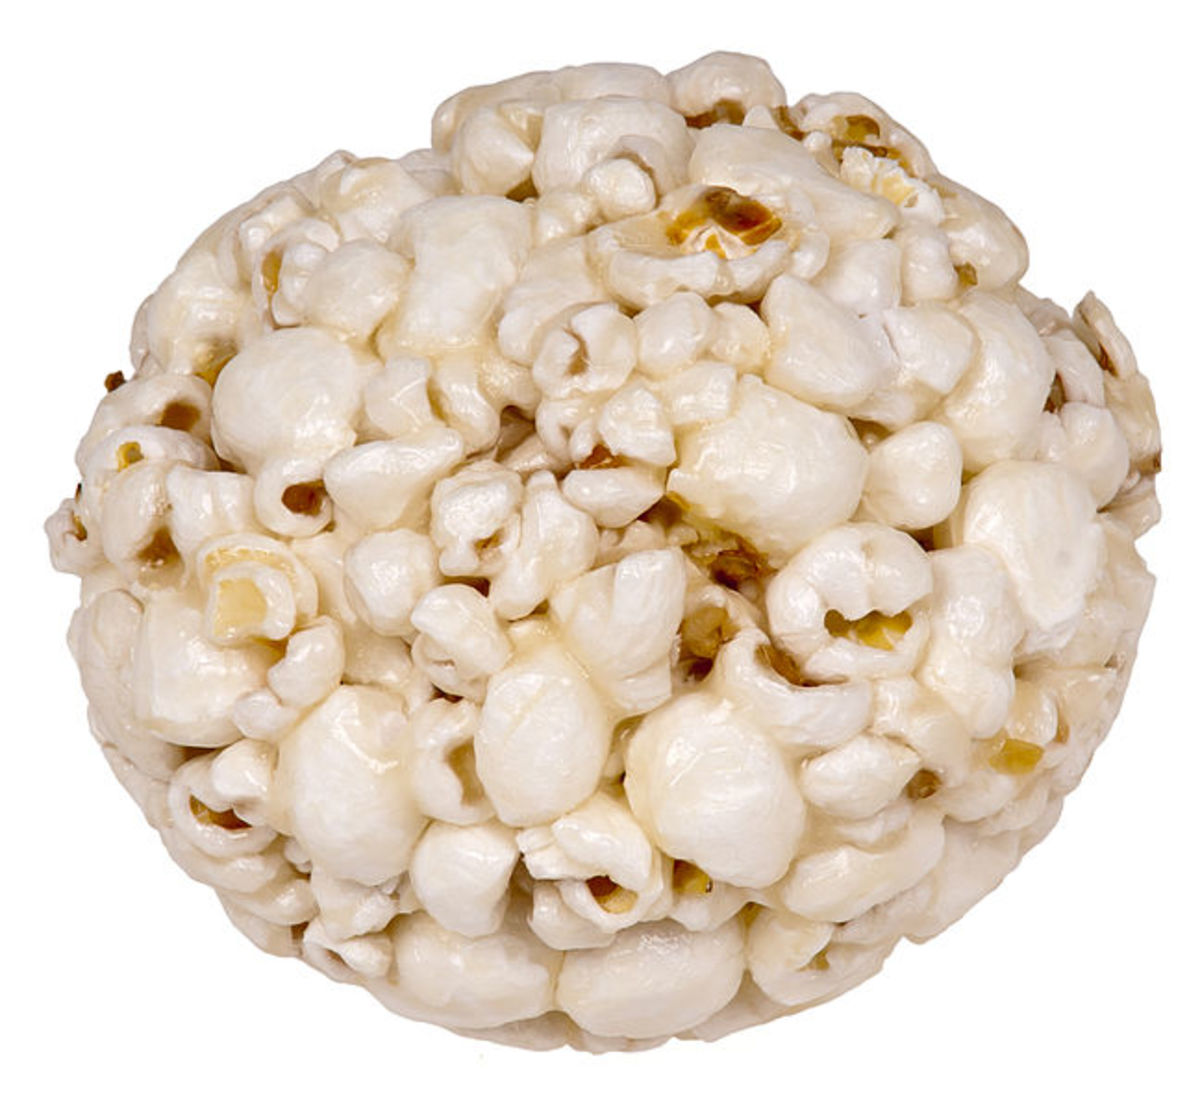 Popcorn balls are fun to make, and adding nuts and dried fruit can add some health value.